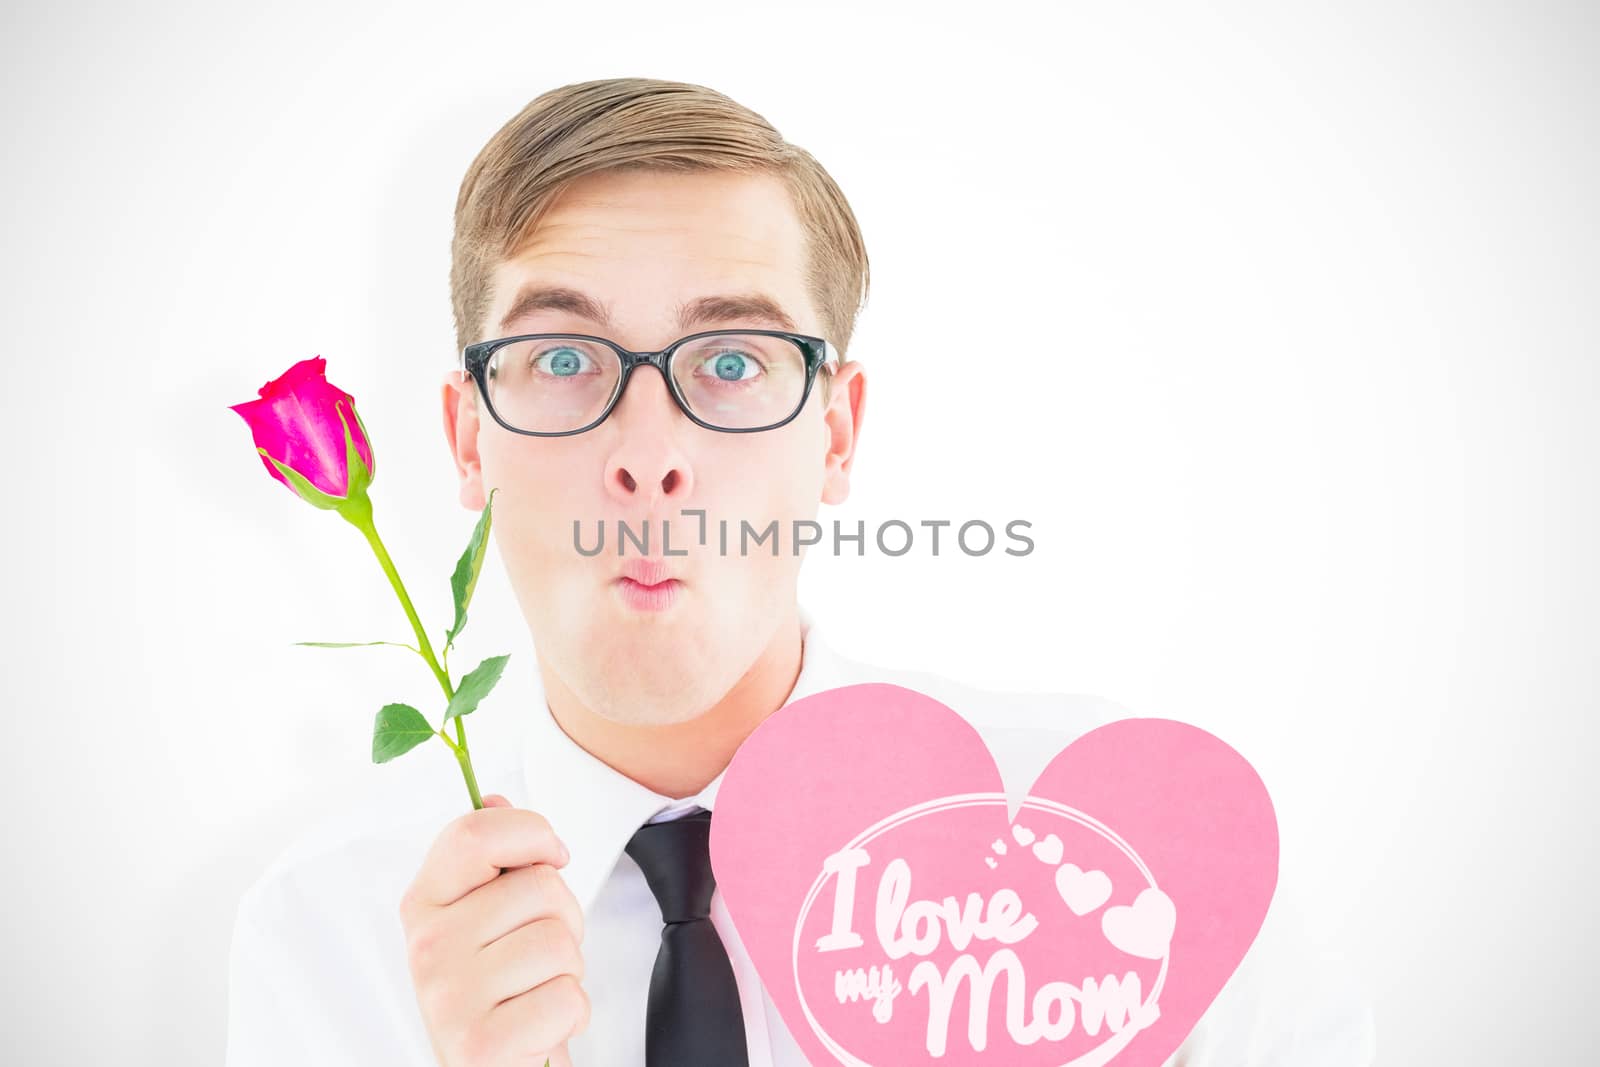 Geeky hipster holding a red rose and heart card against mothers day greeting